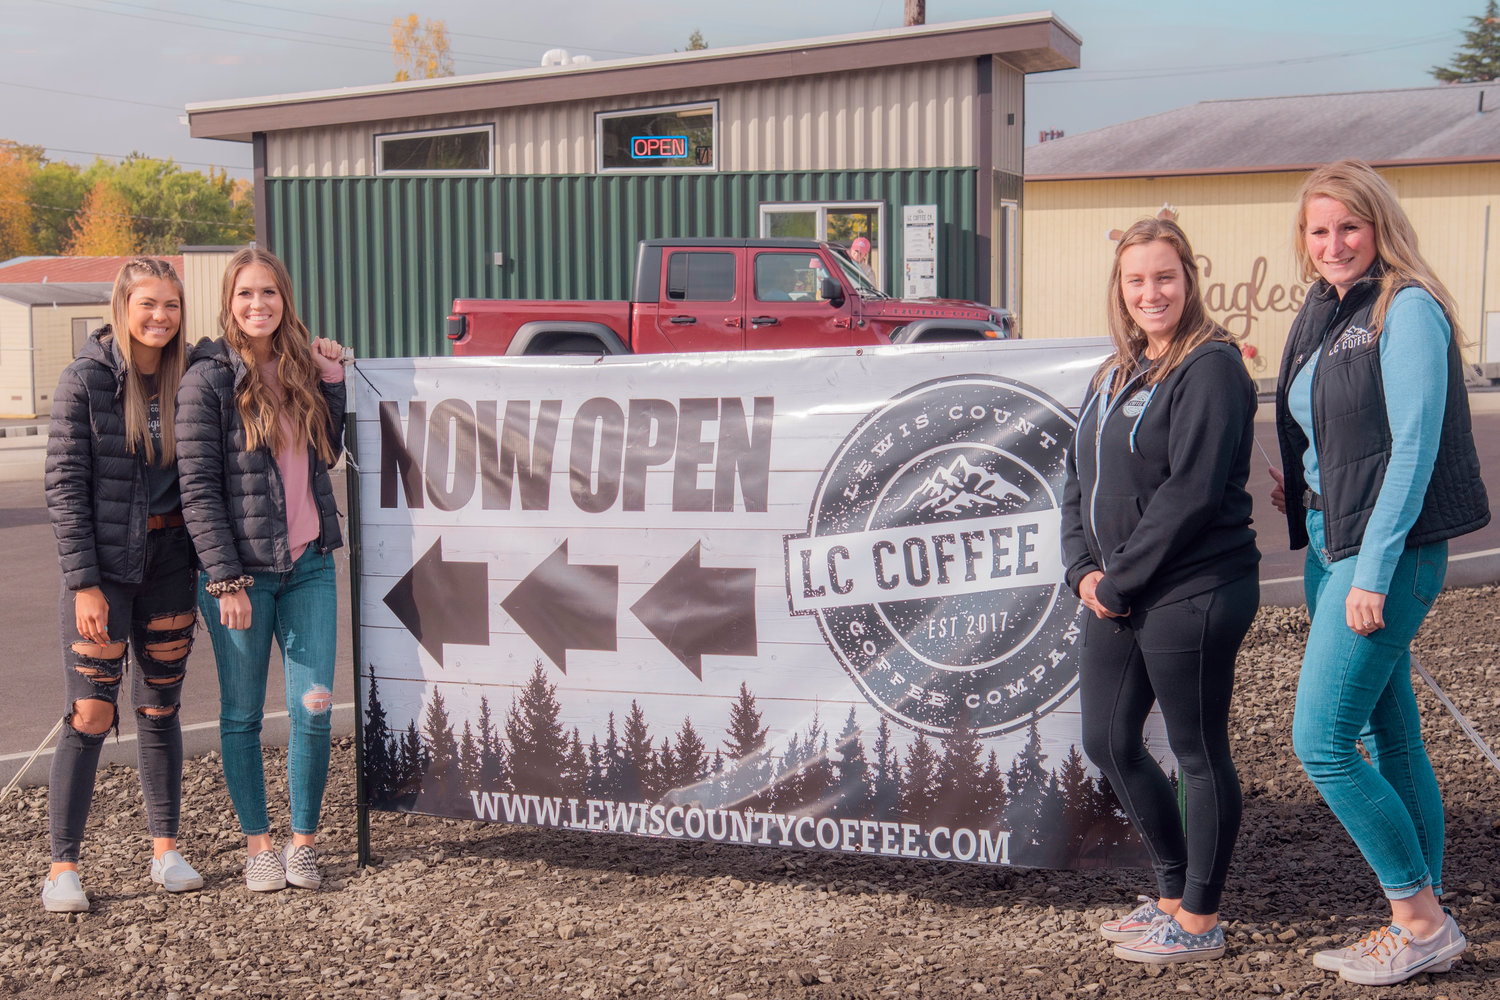 From left, Beth and Angie Twining, Keshia Stockdale and Sam Styger pose for a photo Tuesday outside the newly opened Lewis County Coffee Company stand along Jackson Highway in Chehalis.